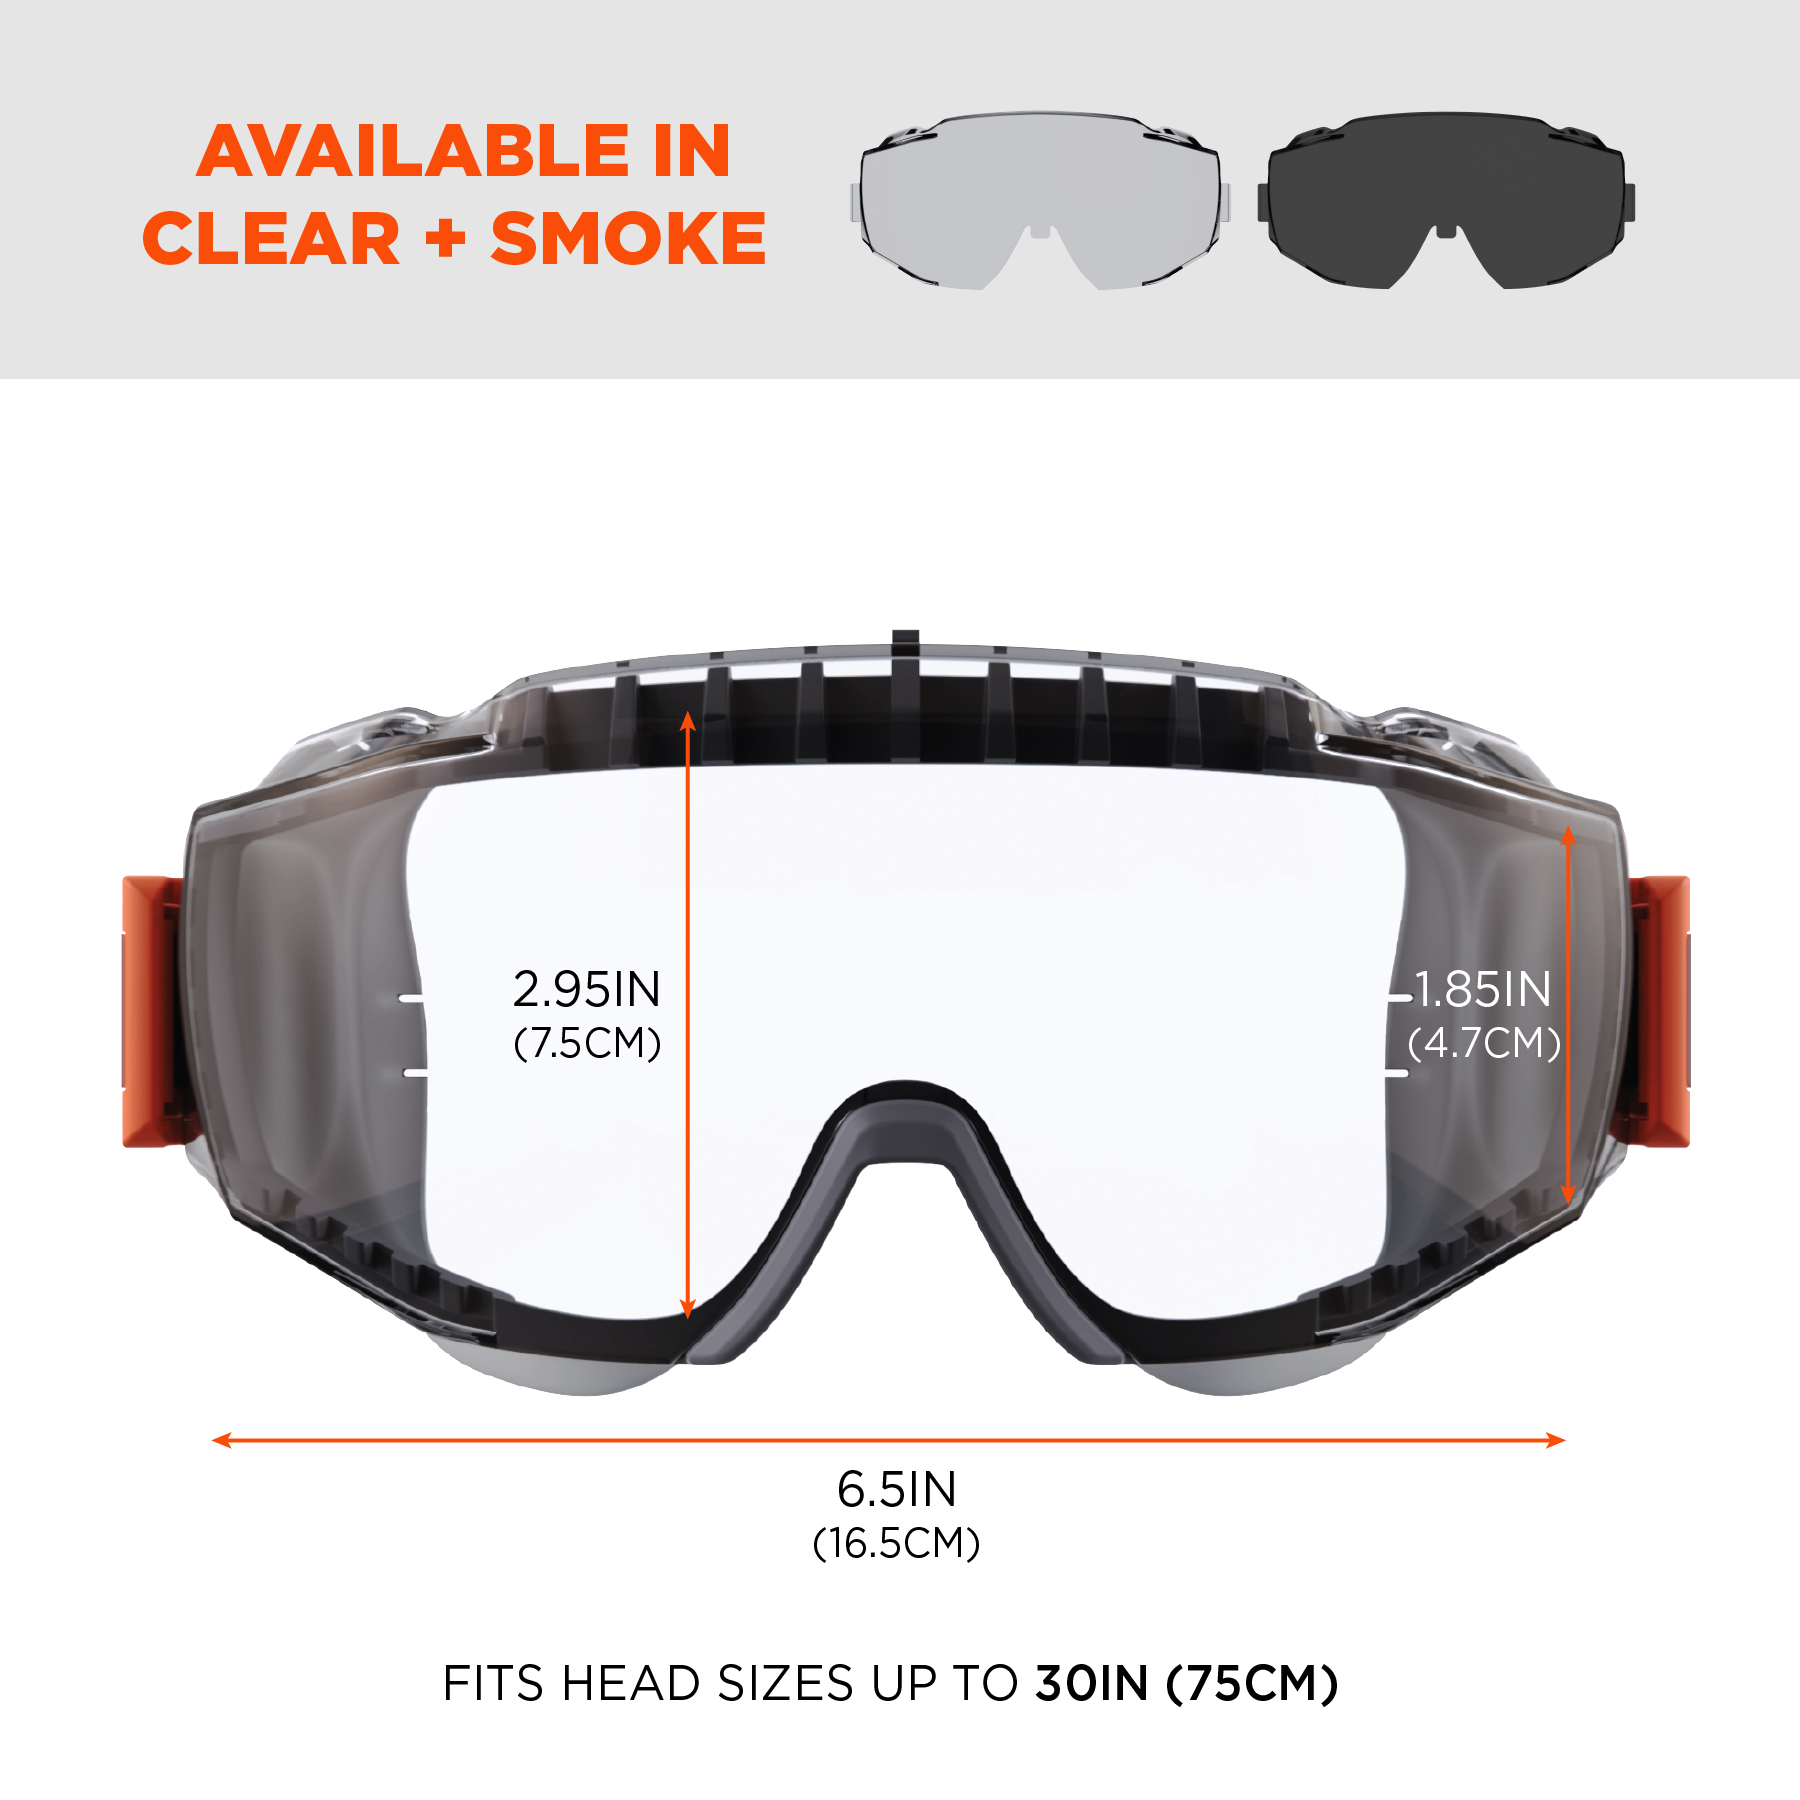 Safety Goggles available in clear and smoke